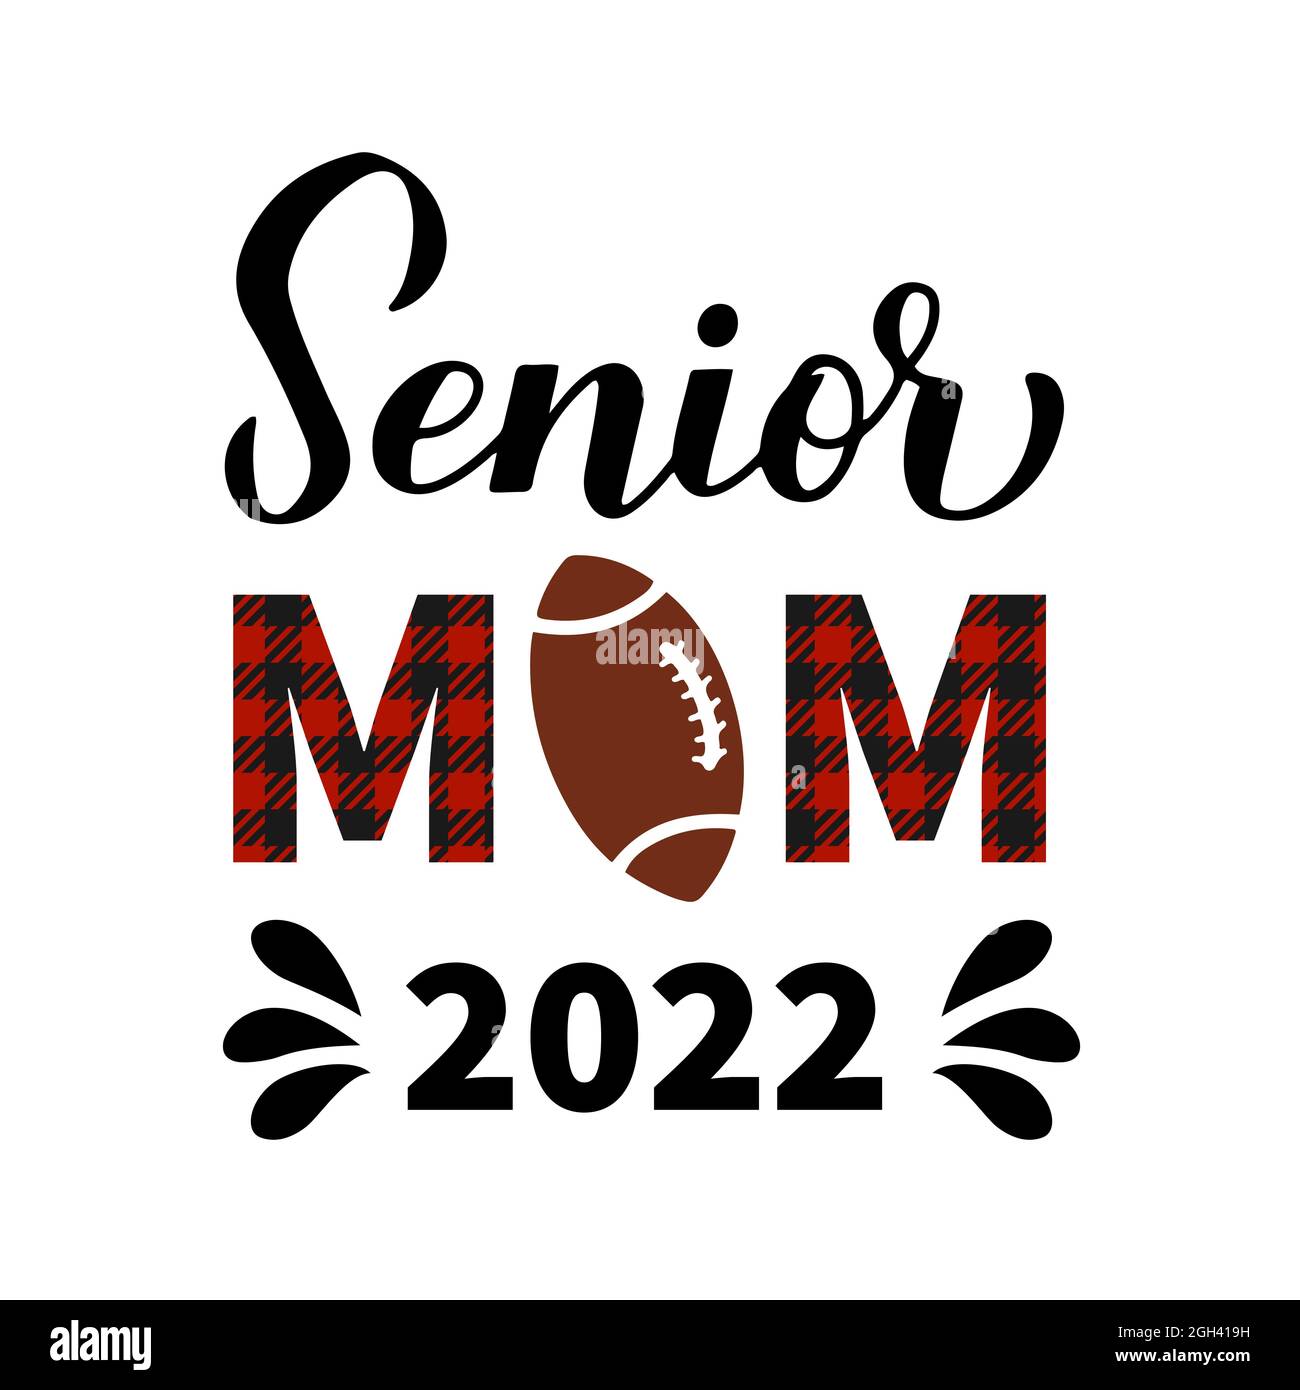 Senior mom 2022 hand lettering. Football quote calligraphy. Vector template for typography poster, banner, sticker, t-shirt, etc. Stock Vector